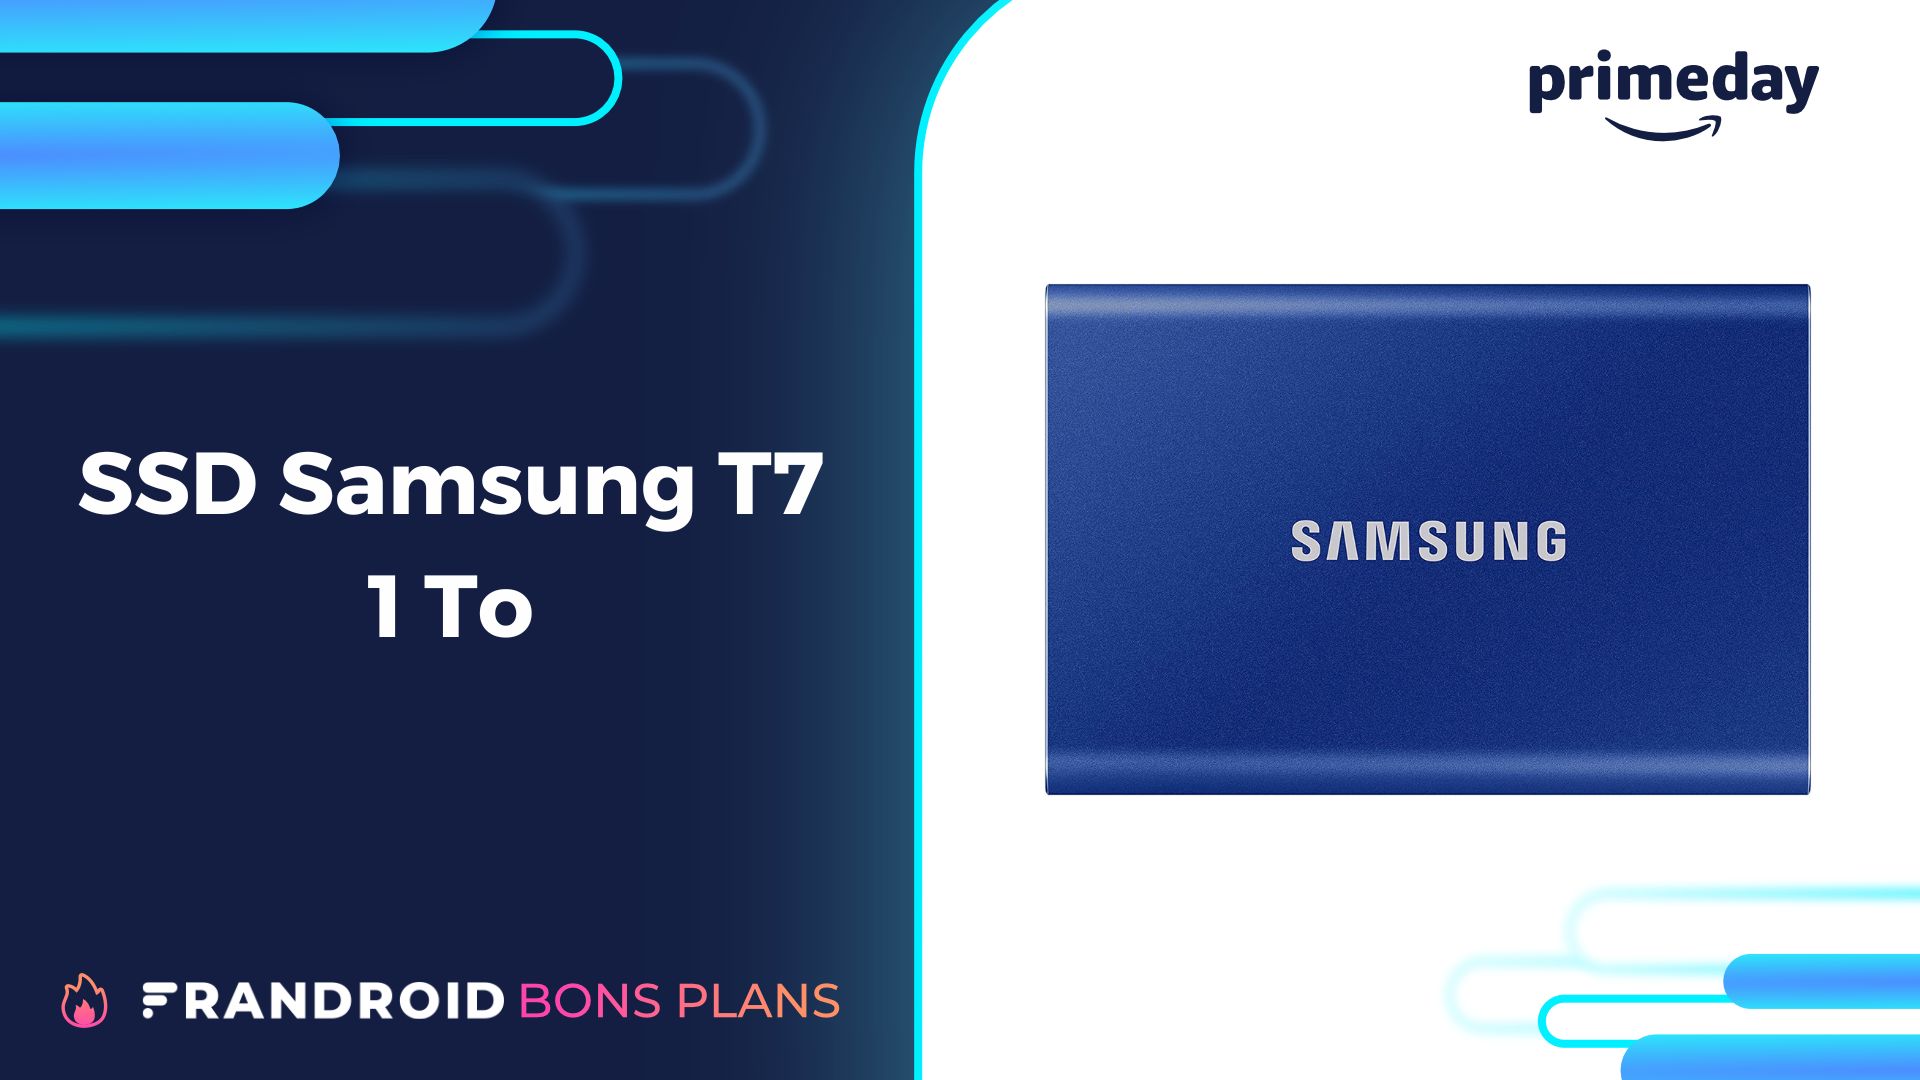 https://images.frandroid.com/wp-content/uploads/2022/07/ssd-samsung-t7-1-to-prime-day-2022.jpg